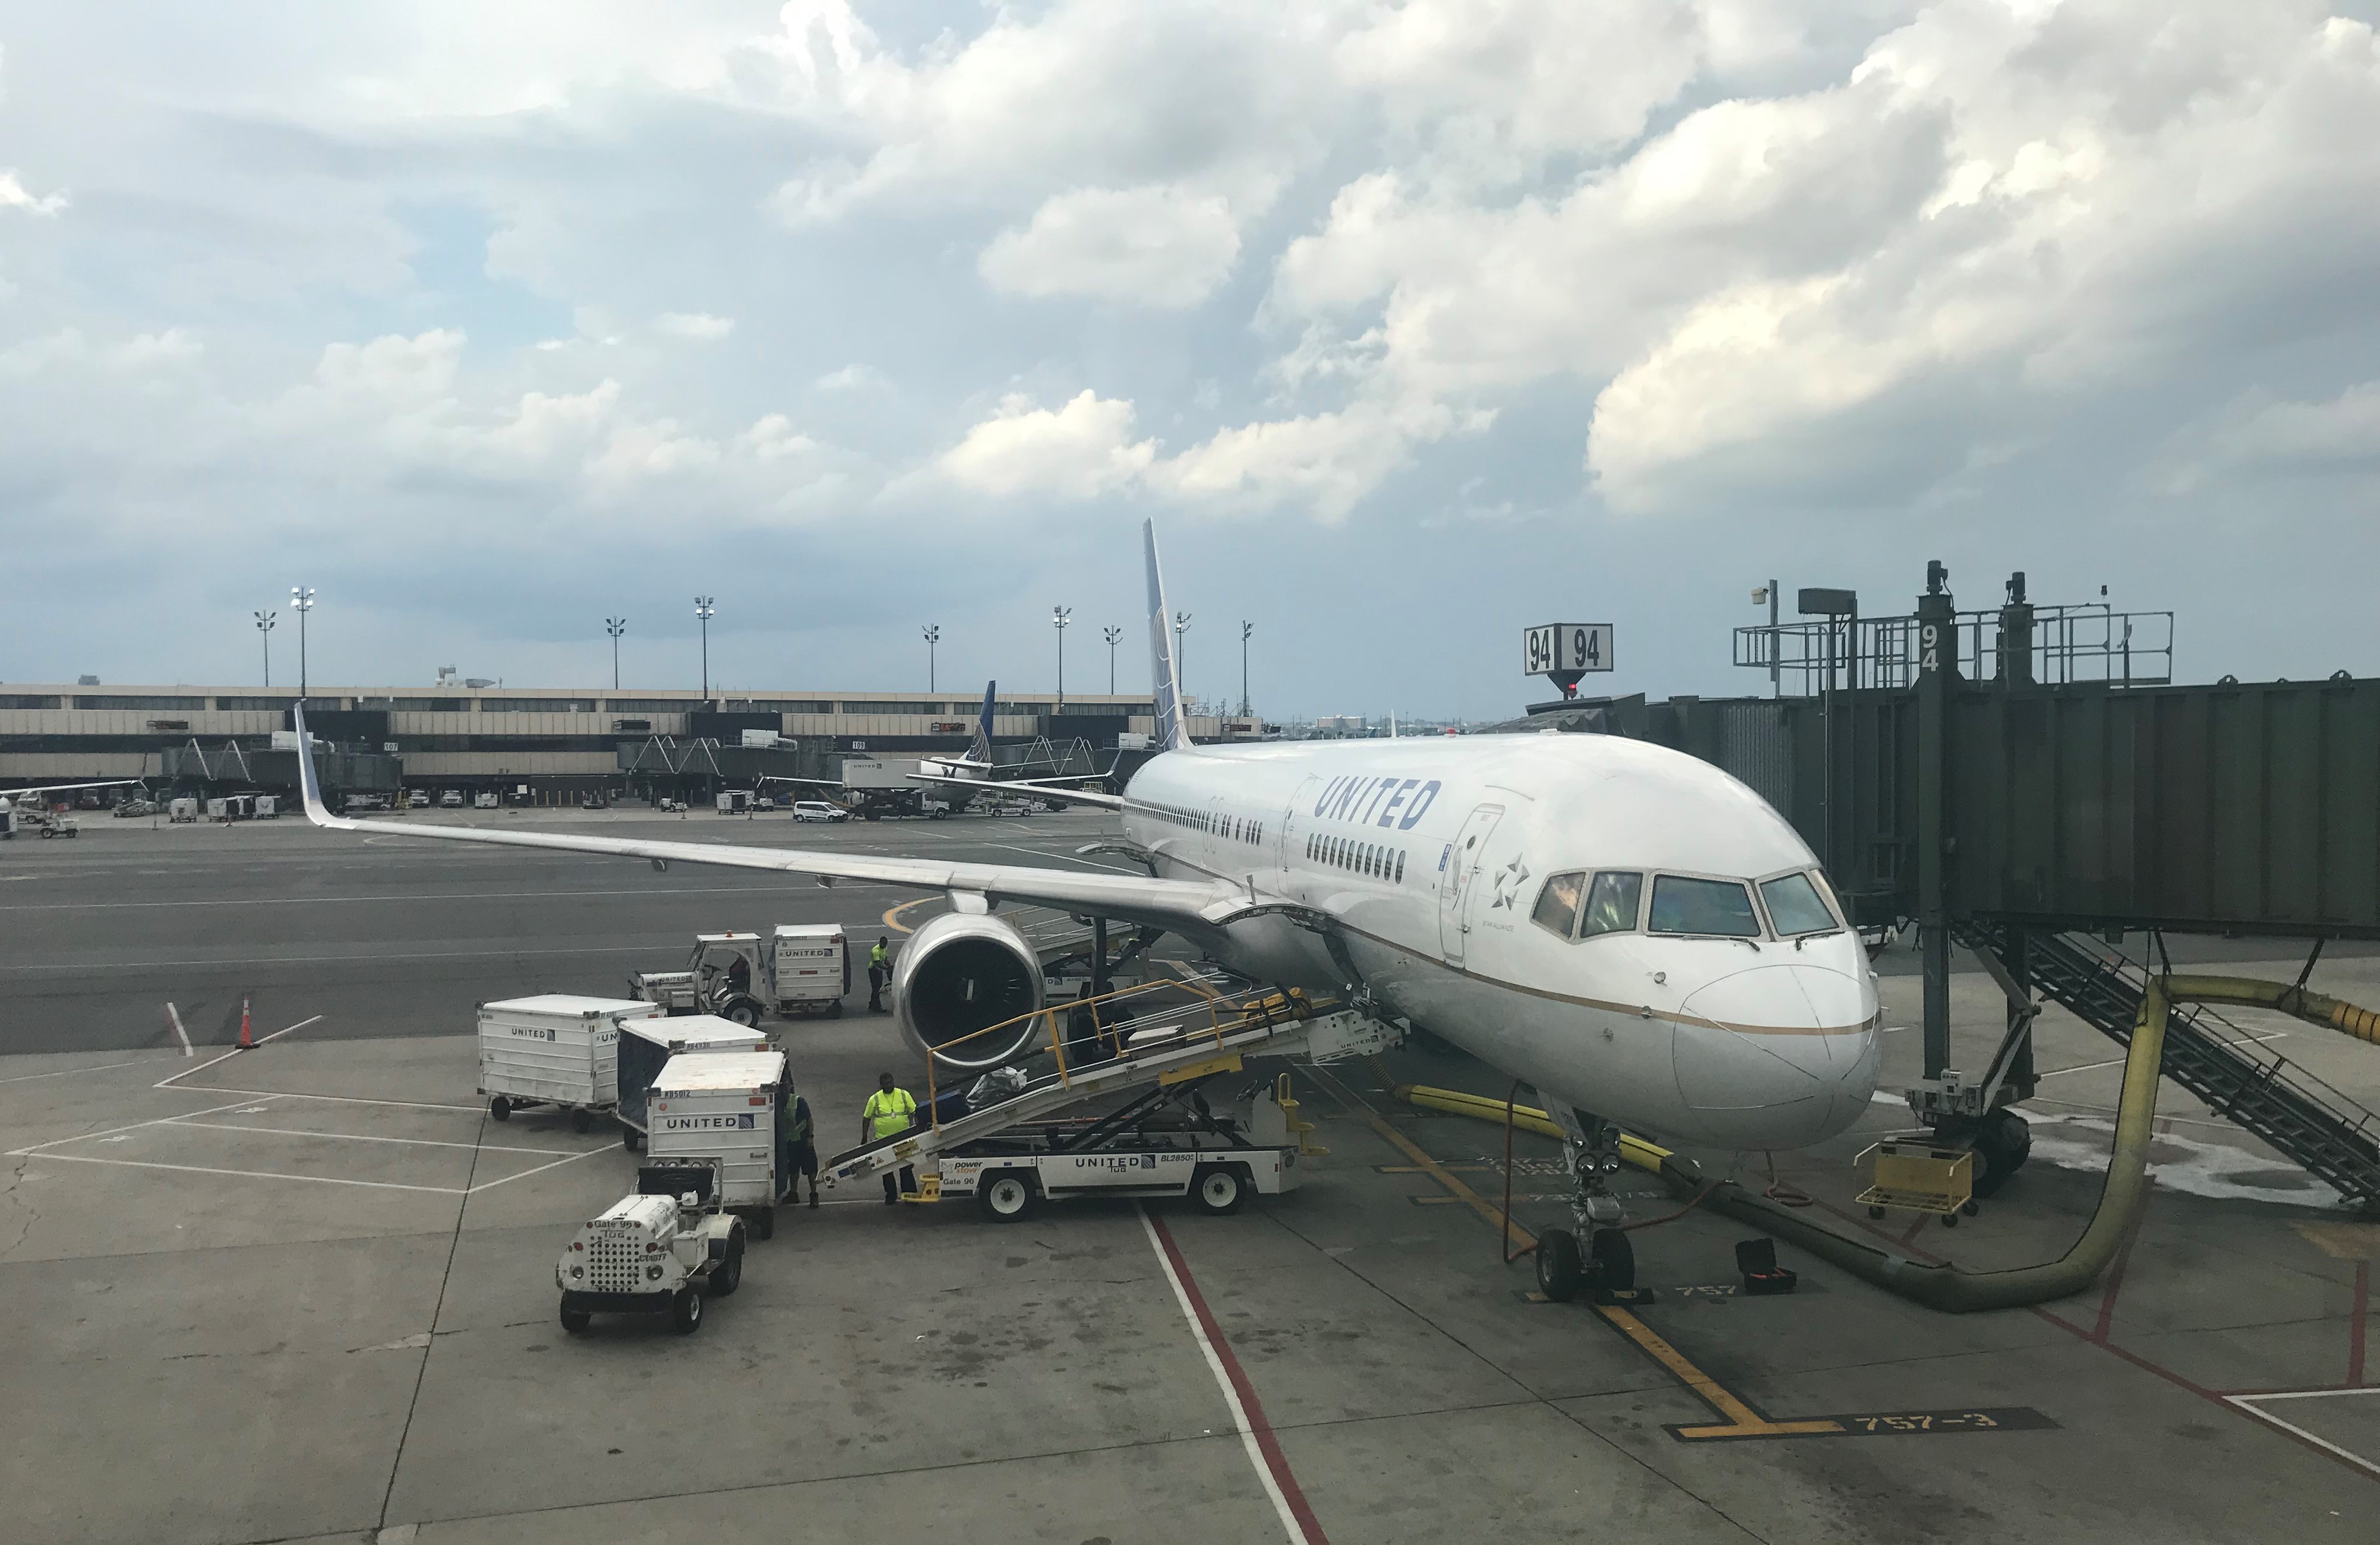 United Will Test Passengers for COVID-19